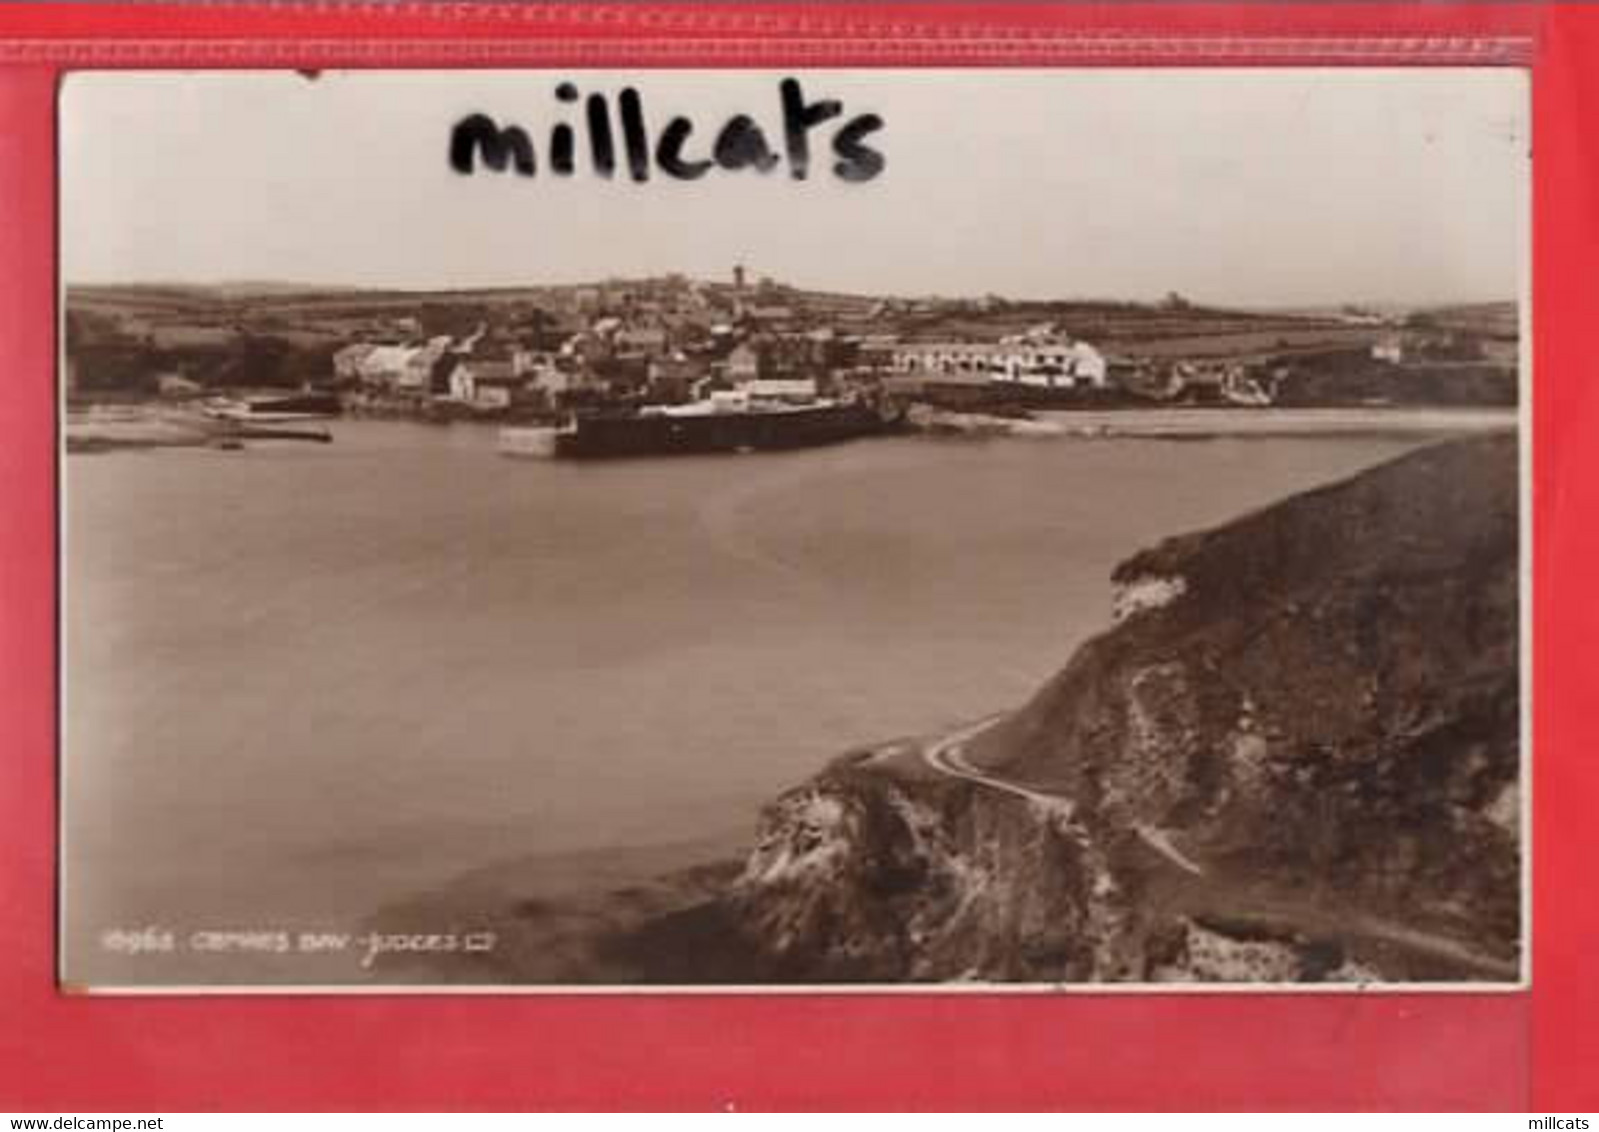 ANGLESEY  CEMAES  BAY  JUDGES  RP    Pu 1938 - Anglesey